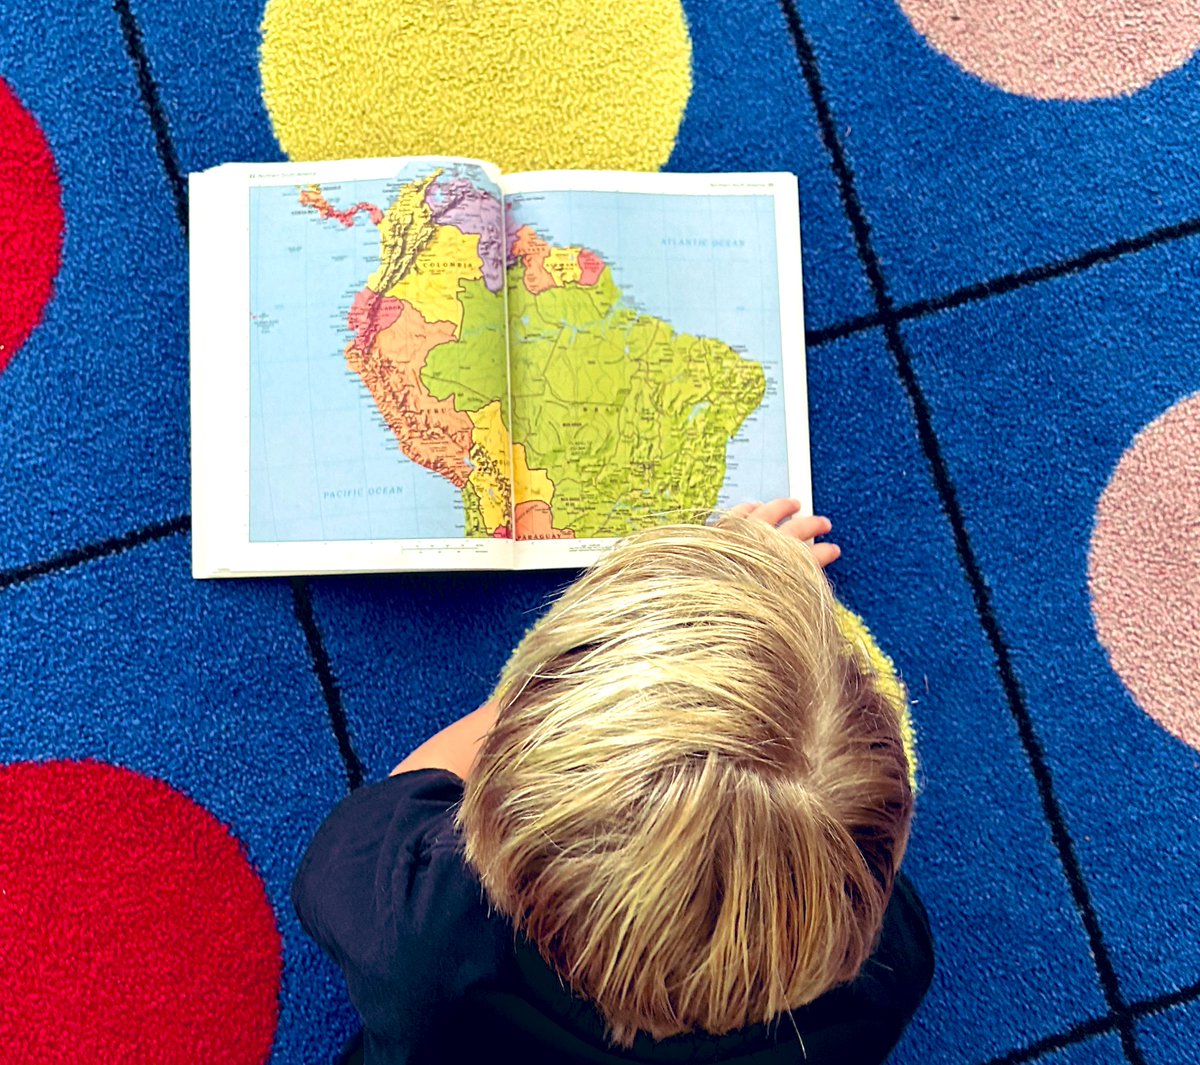 RT <a target='_blank' href='http://twitter.com/MrsHofferAPS'>@MrsHofferAPS</a>: Our <a target='_blank' href='http://twitter.com/Ashlawneagles'>@Ashlawneagles</a> learning all about maps during our geography unit 🗺️<a target='_blank' href='http://twitter.com/APSsocstudies'>@APSsocstudies</a> <a target='_blank' href='https://t.co/BxYtSkGDeH'>https://t.co/BxYtSkGDeH</a>